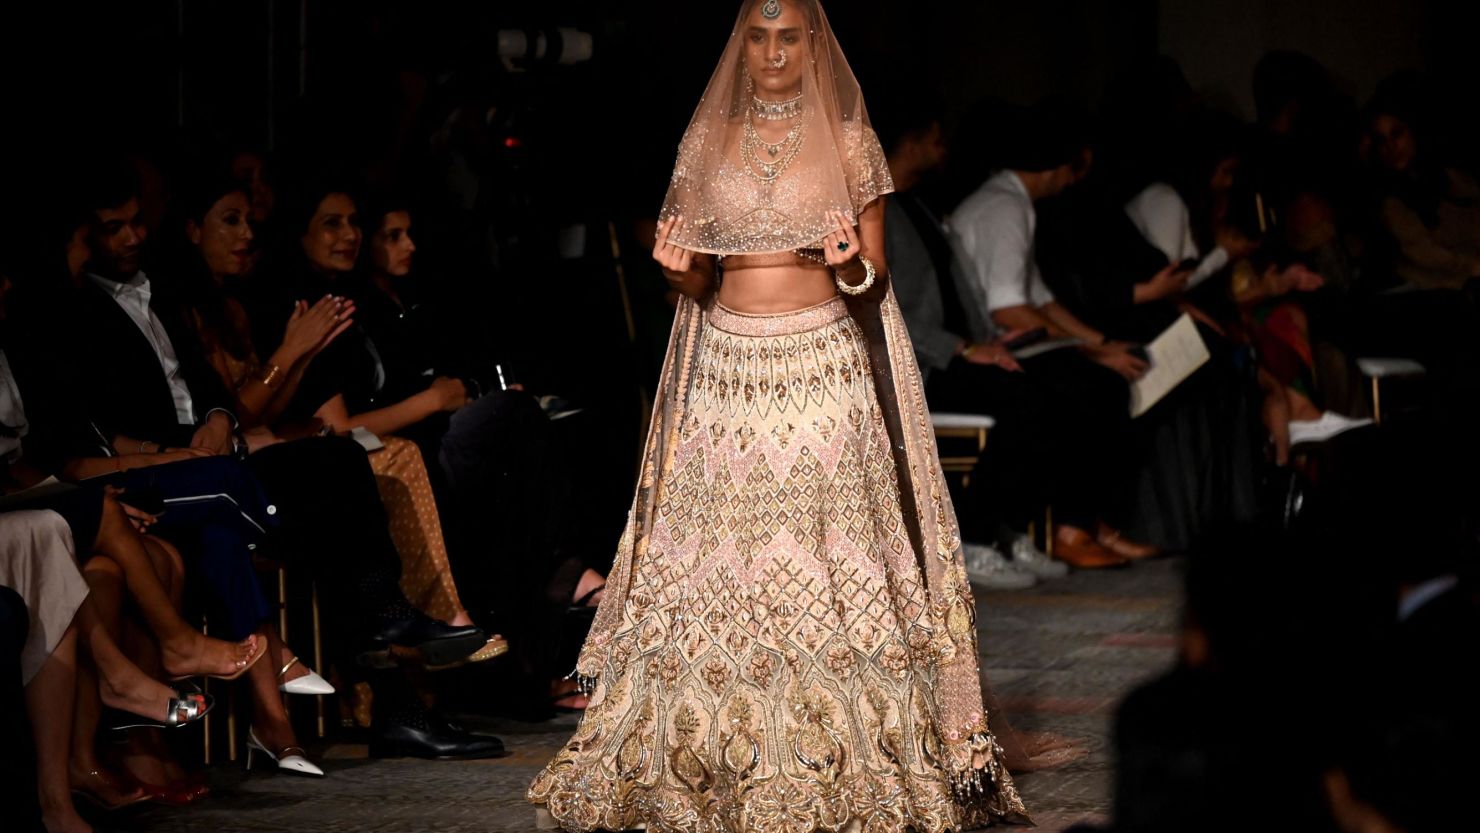 A model presents a creation by designer Tarun Tahiliani during the FDCI India Couture Week in New Delhi on July 22, 2022. - -- IMAGE RESTRICTED TO EDITORIAL USE - STRICTLY NO COMMERCIAL USE -- (Photo by Sajjad HUSSAIN / AFP) / -- IMAGE RESTRICTED TO EDITORIAL USE - STRICTLY NO COMMERCIAL USE -- (Photo by SAJJAD HUSSAIN/AFP via Getty Images)